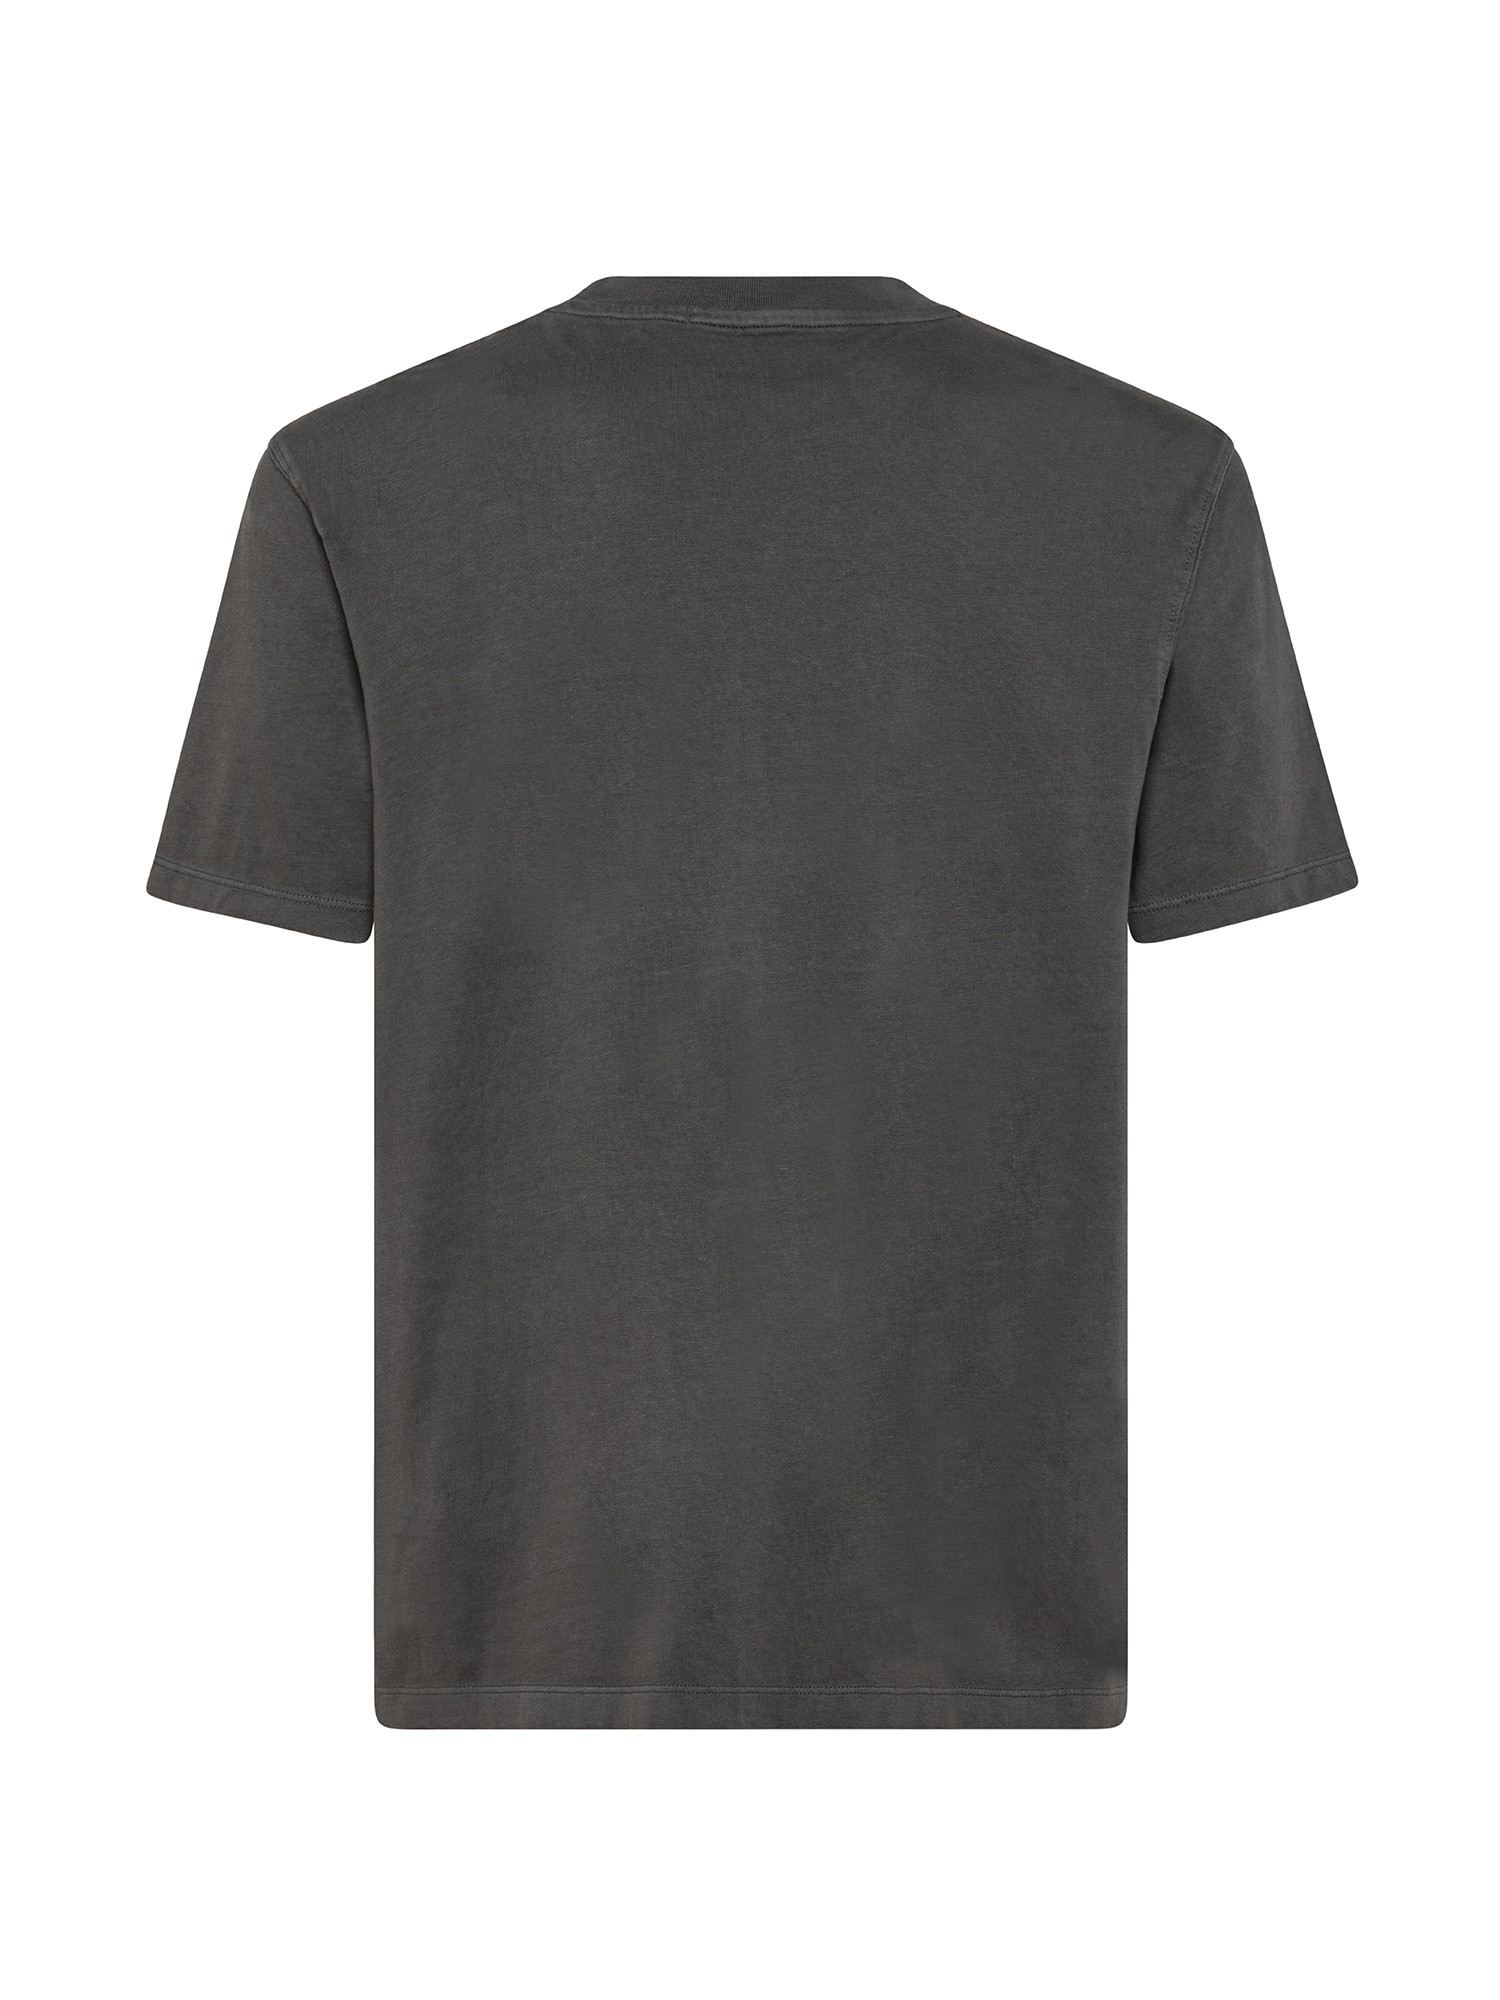 Cotton T-shirt with logo, Grey, large image number 1